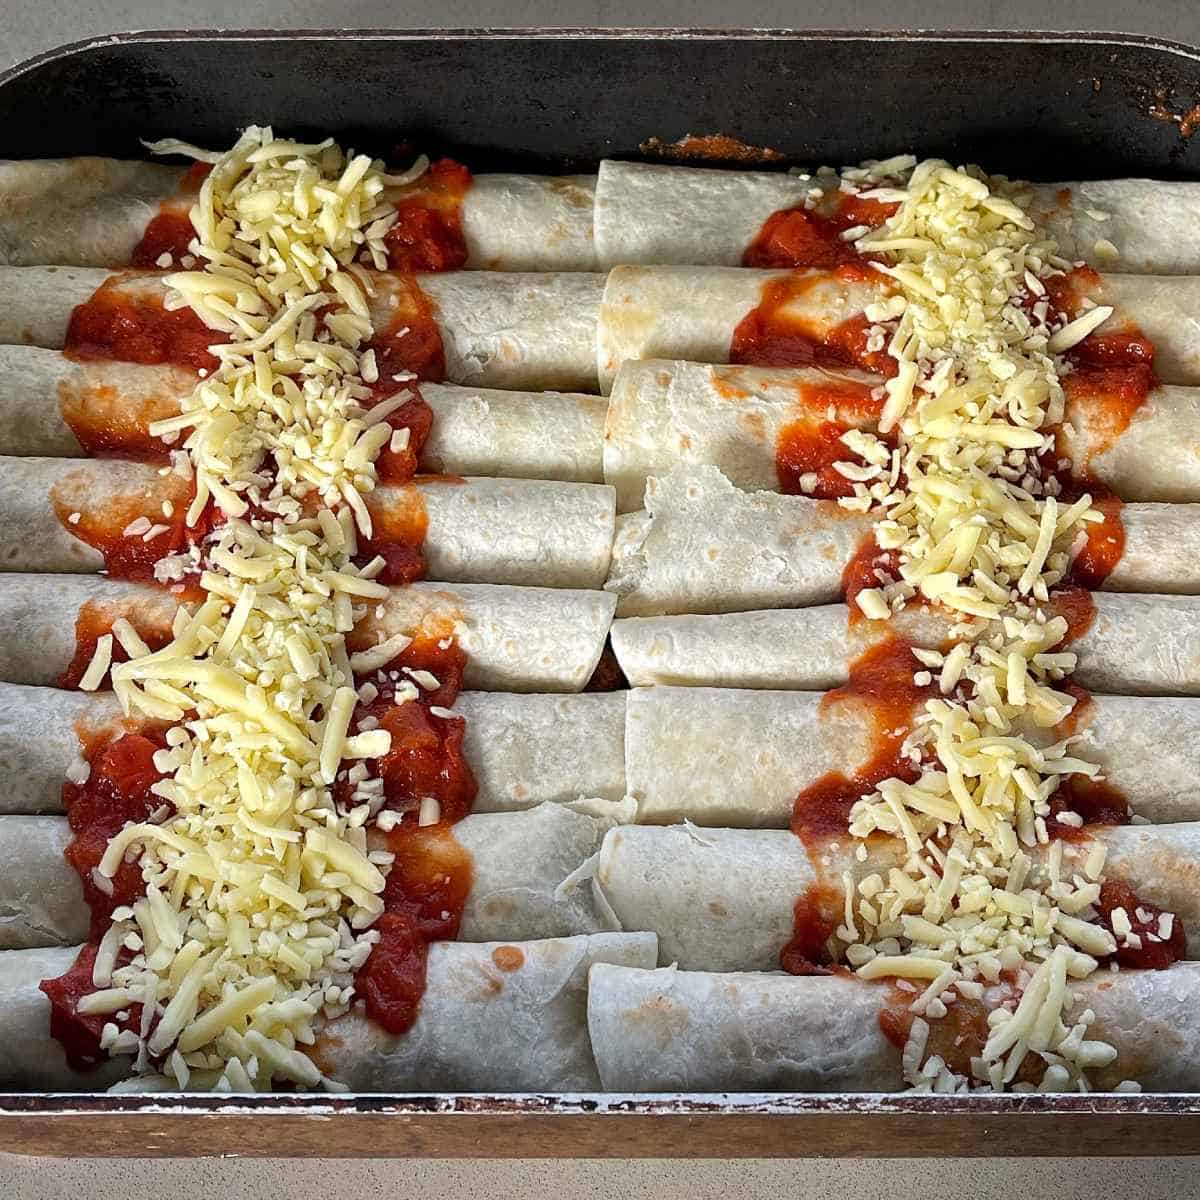 Beef enchiladas being prepared in a large tray